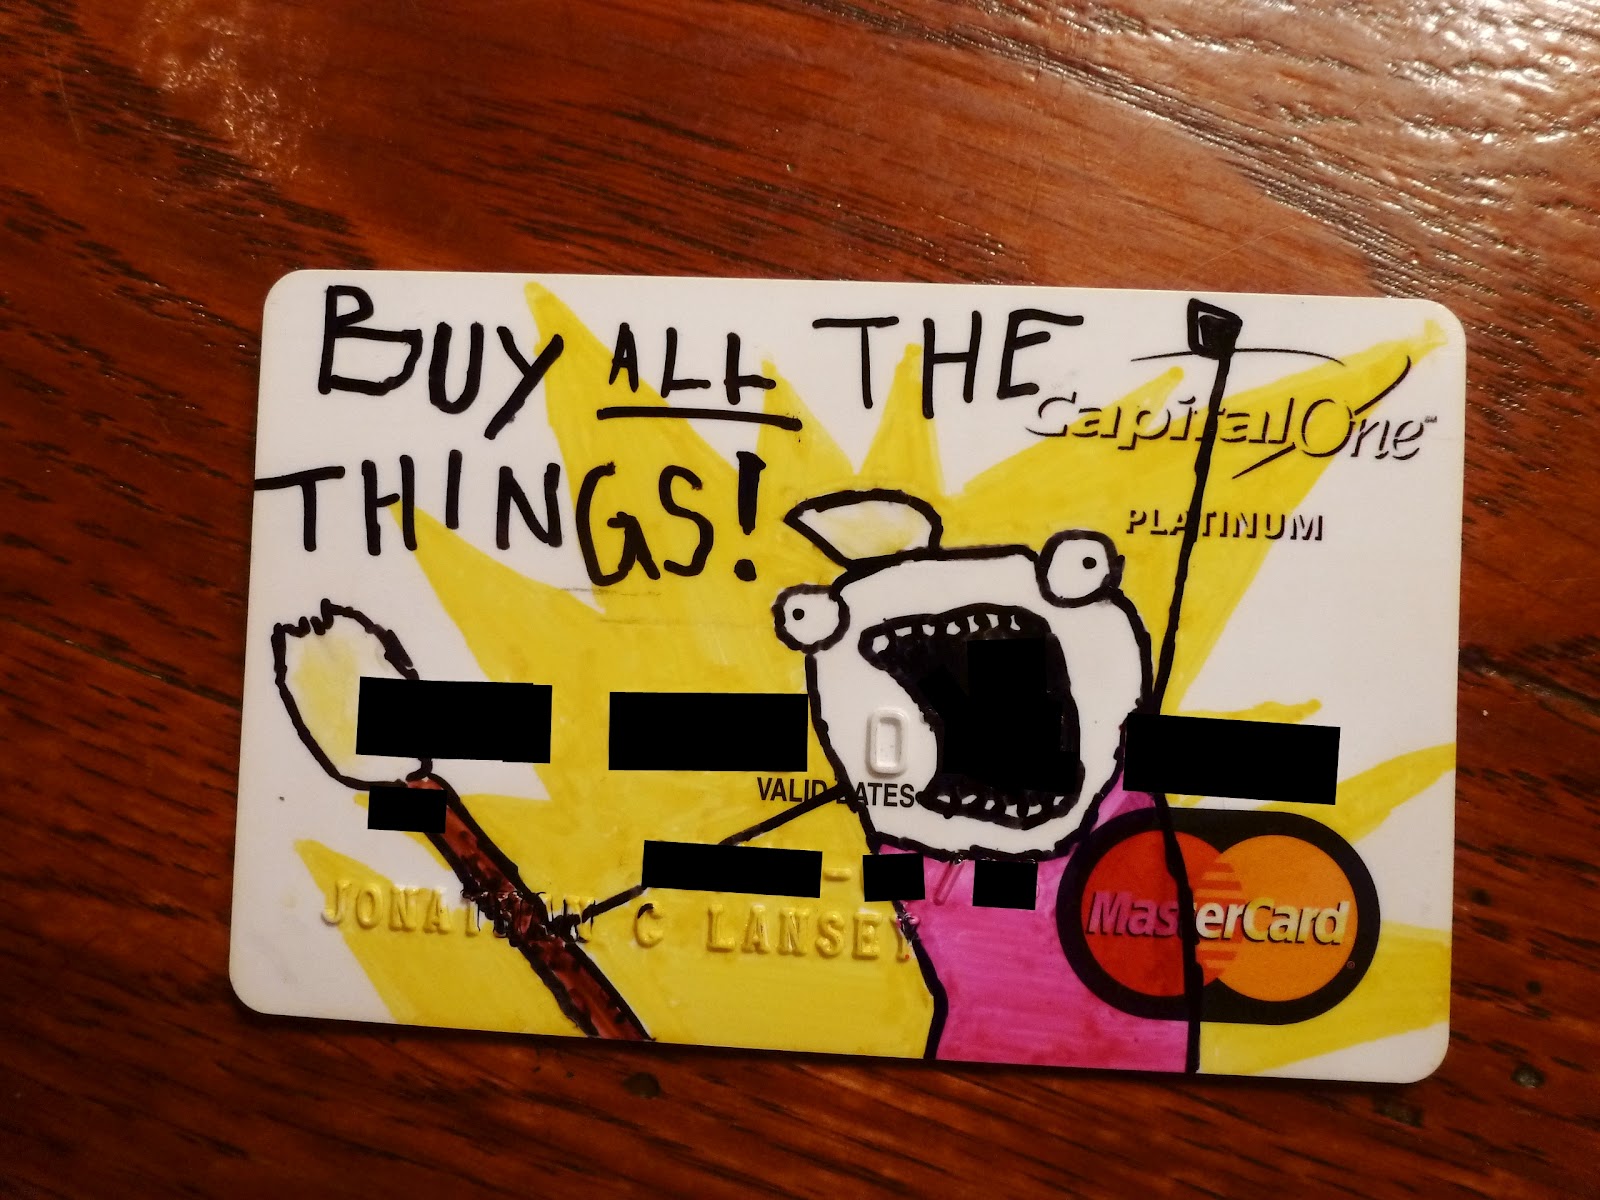 The Lansey Brothers' Blog: Buy all the things Credit Card ...